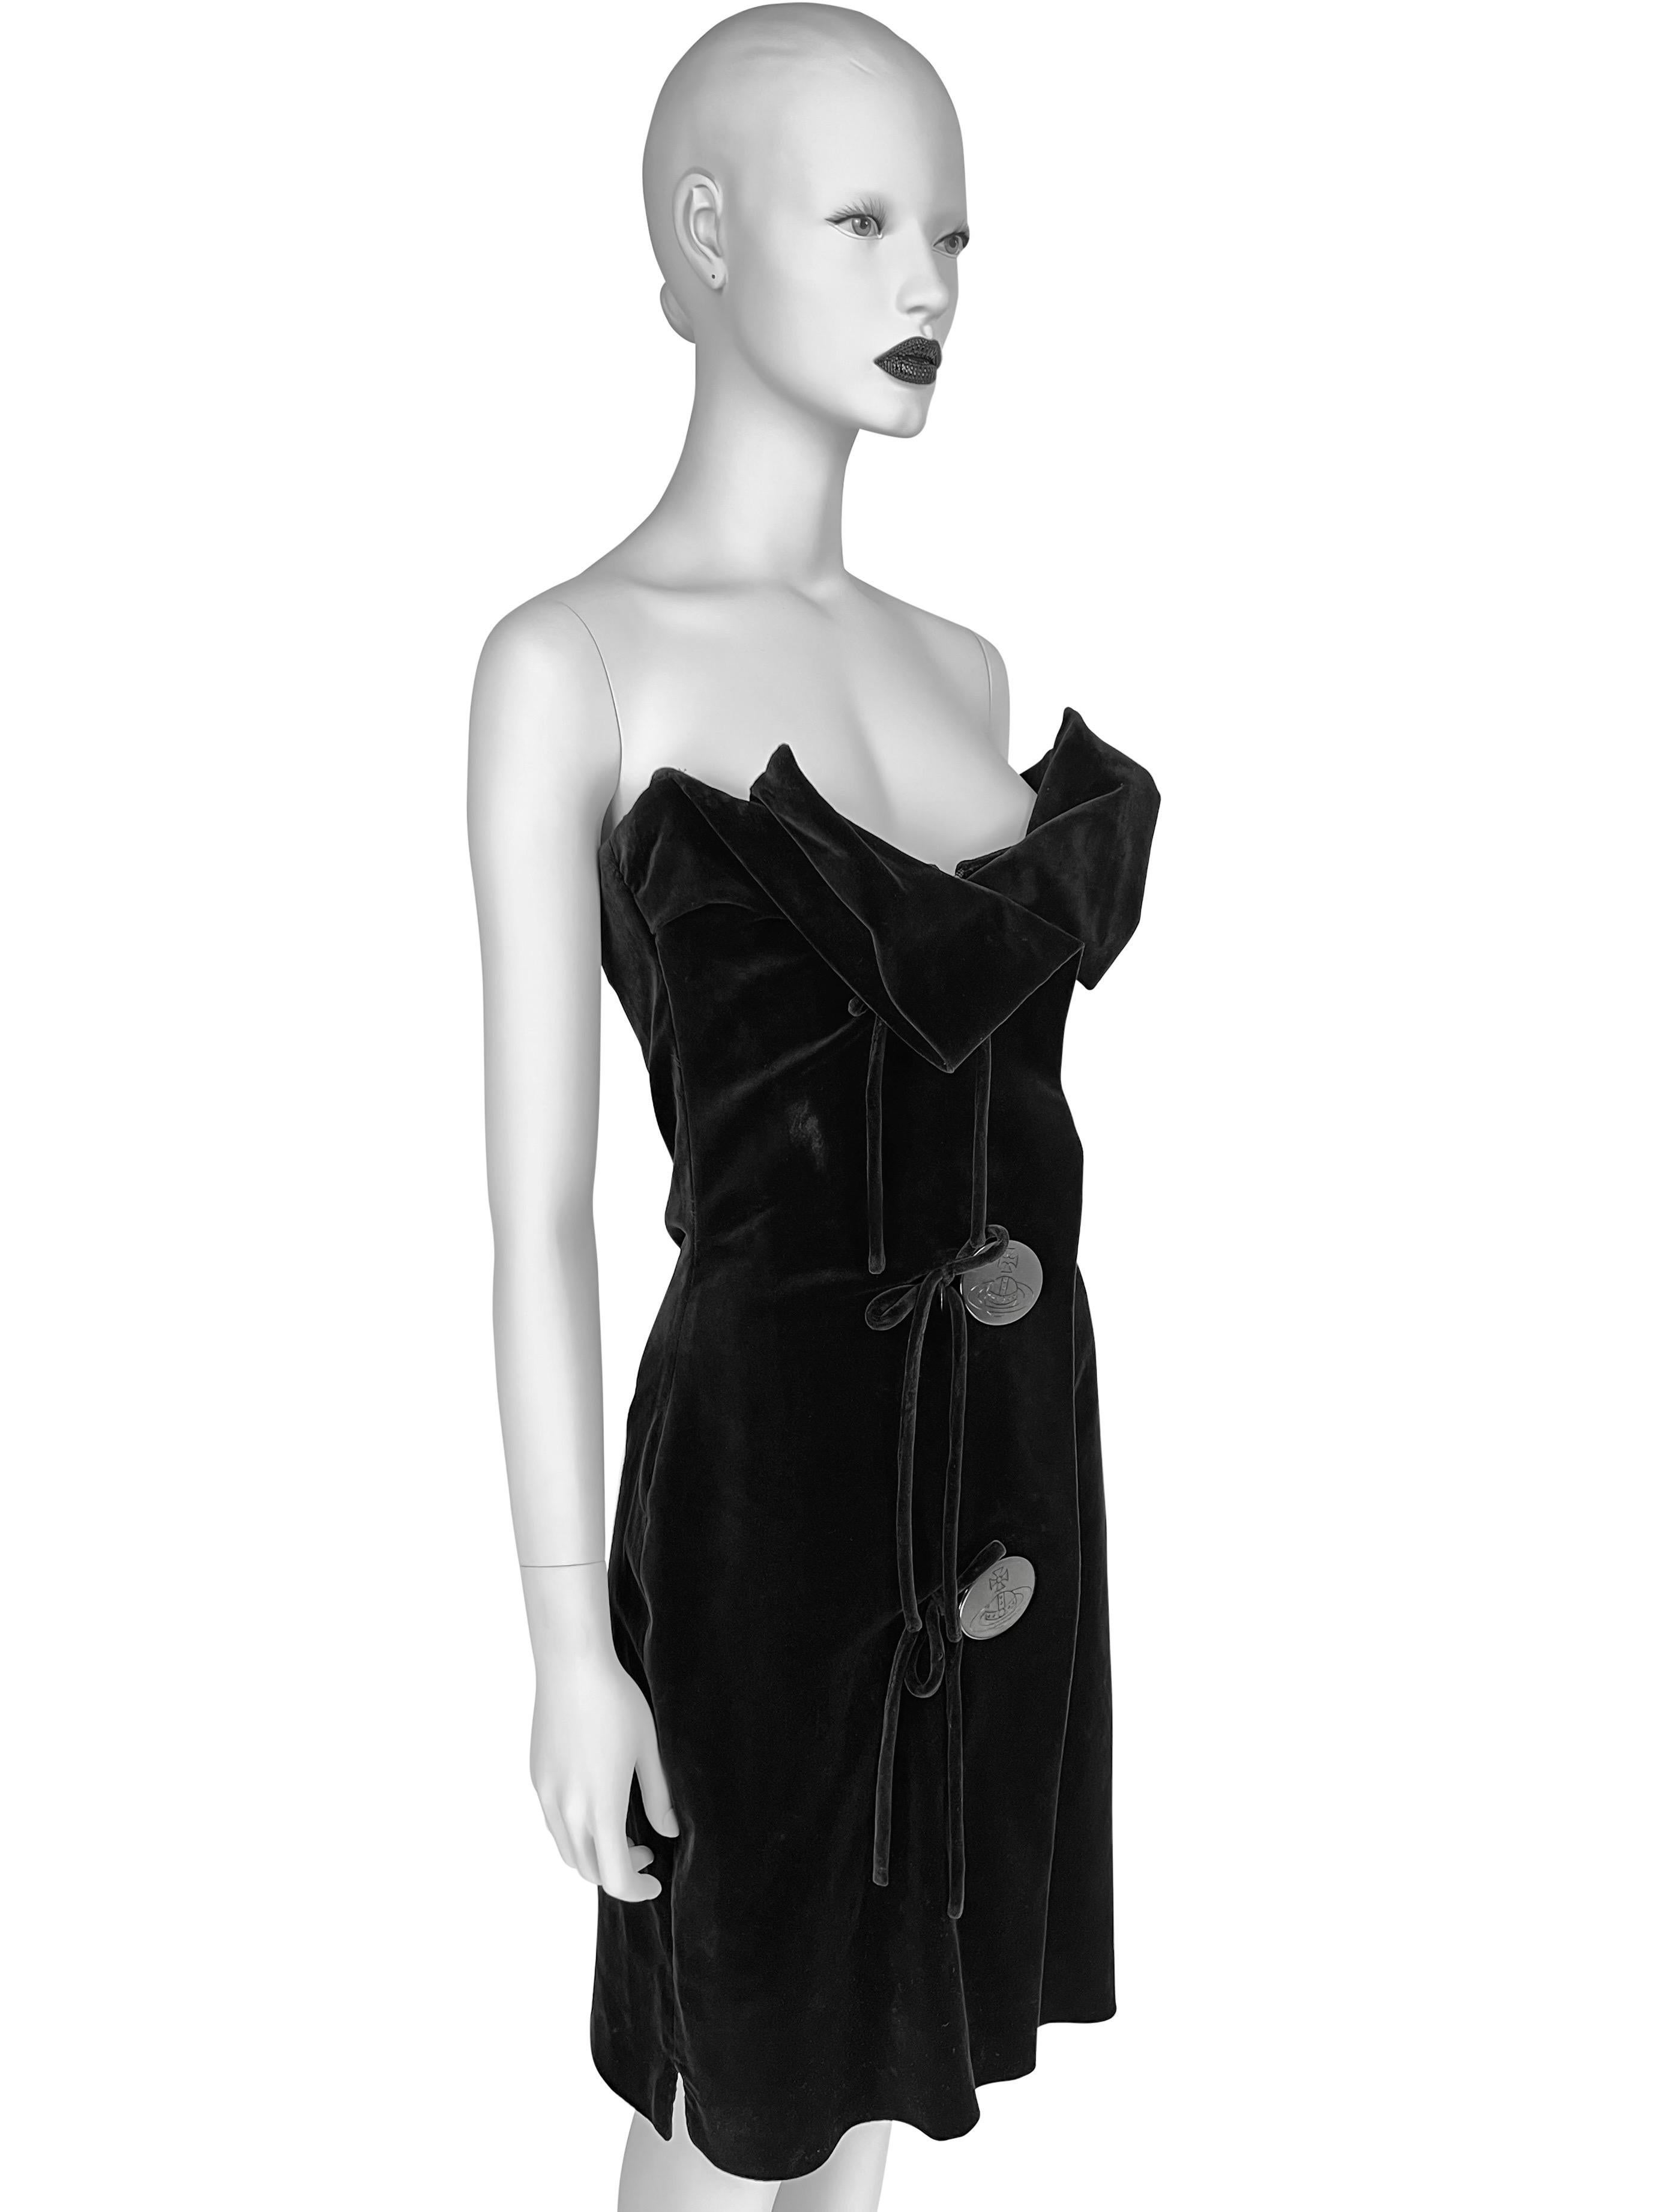 Fall 1998 Vivienne Westwood Corseted Velvet Dress For Sale 9